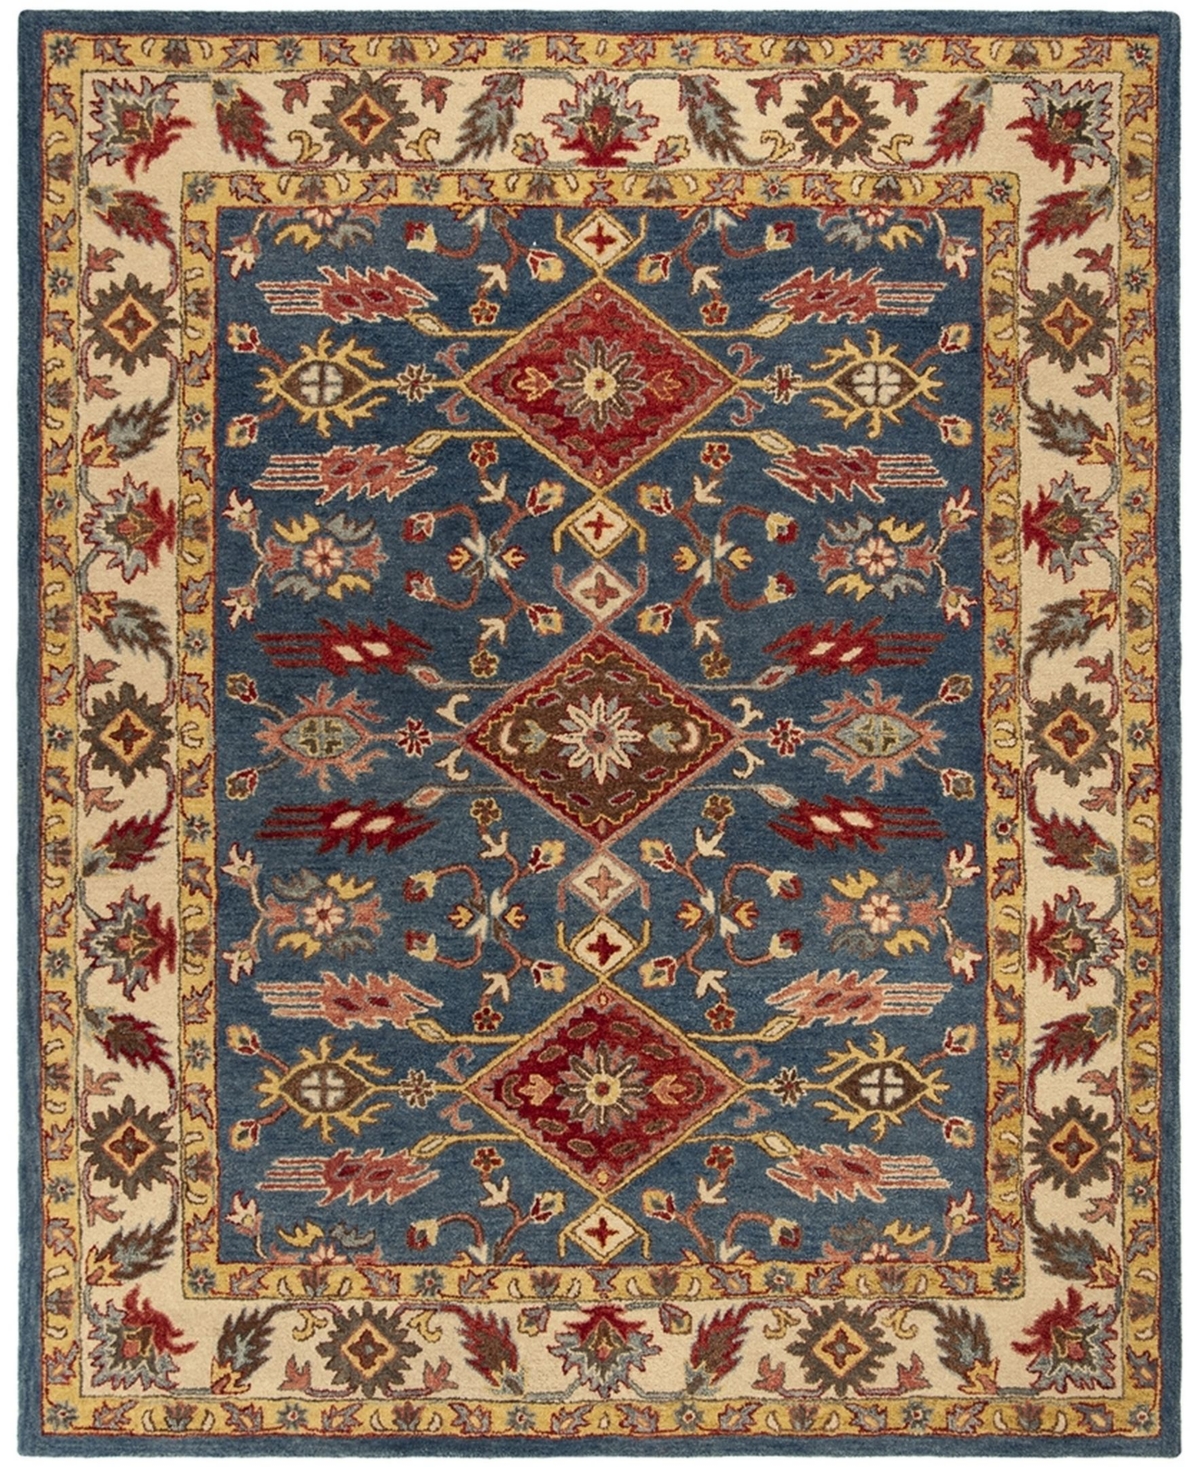 Safavieh Antiquity At506 Blue and Red 6' x 9' Area Rug - Blue